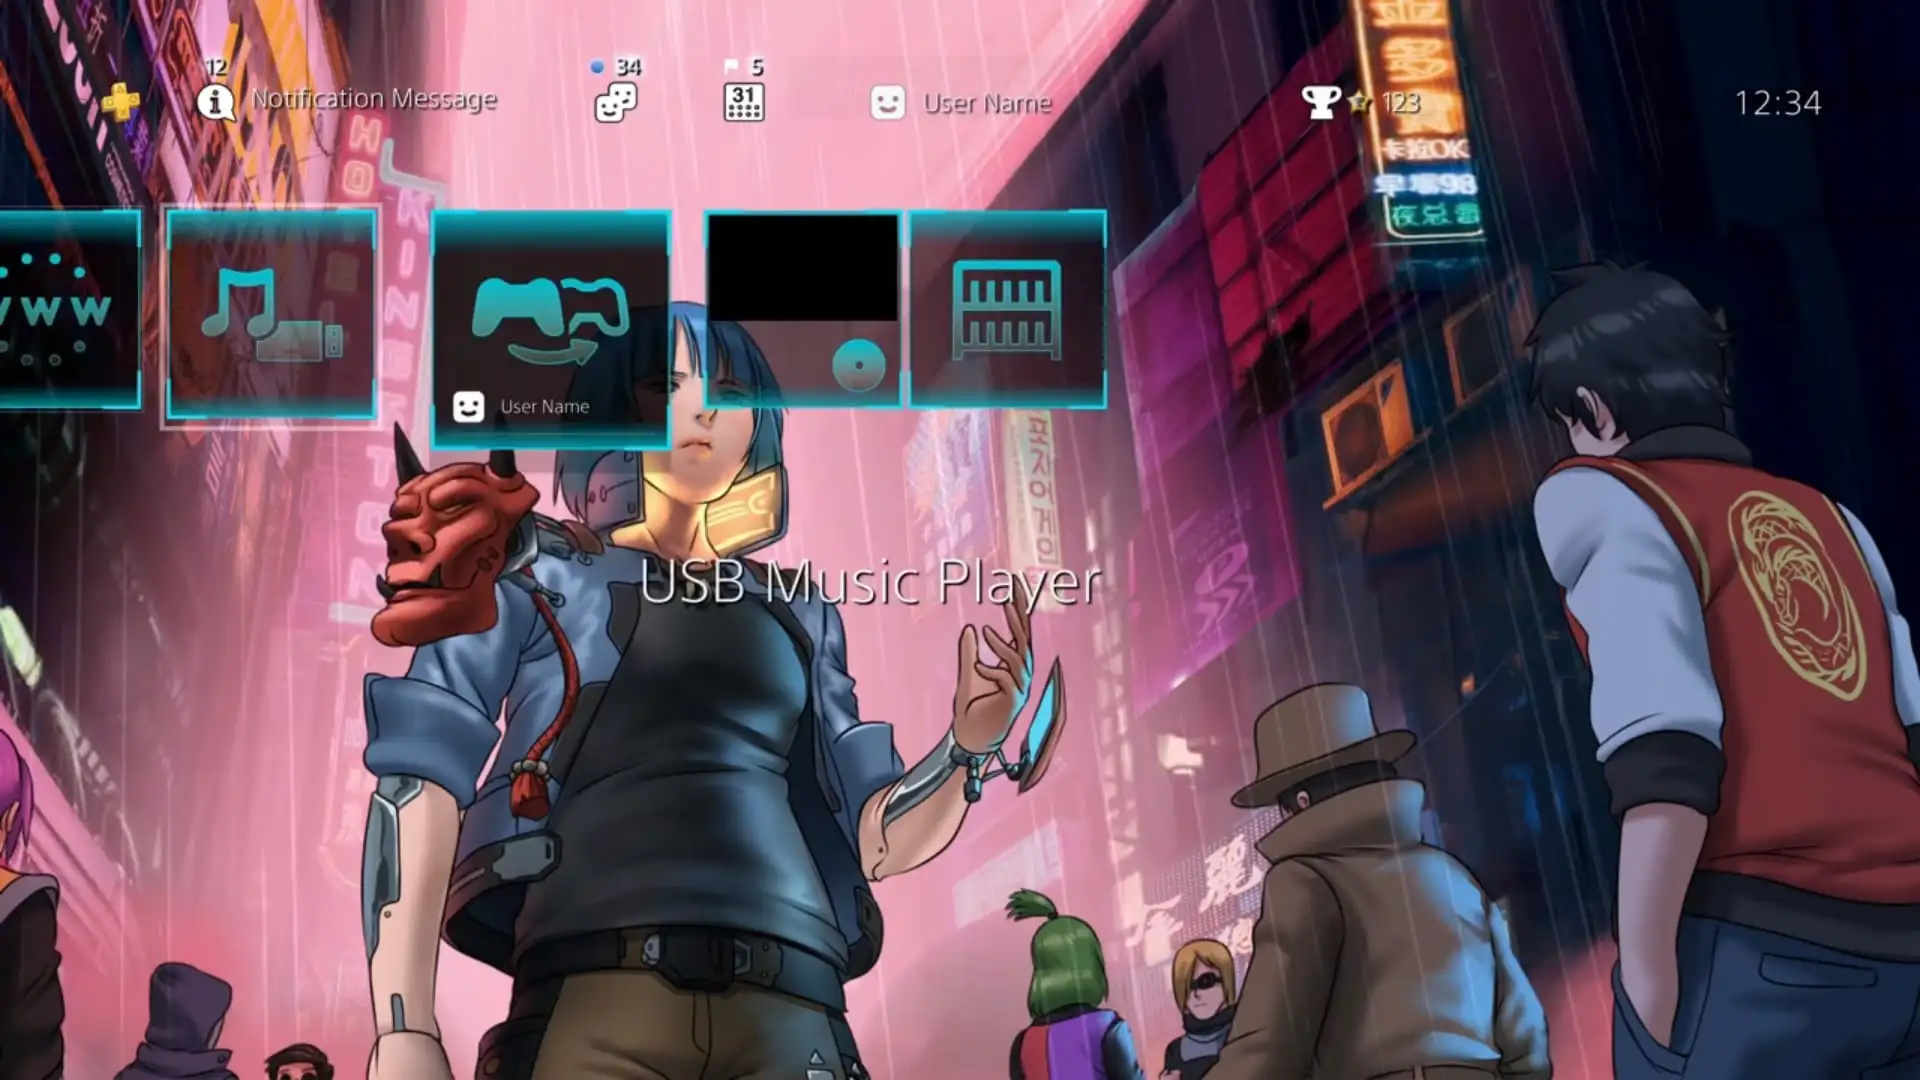 10 Best Ps4 Themes From November 2019